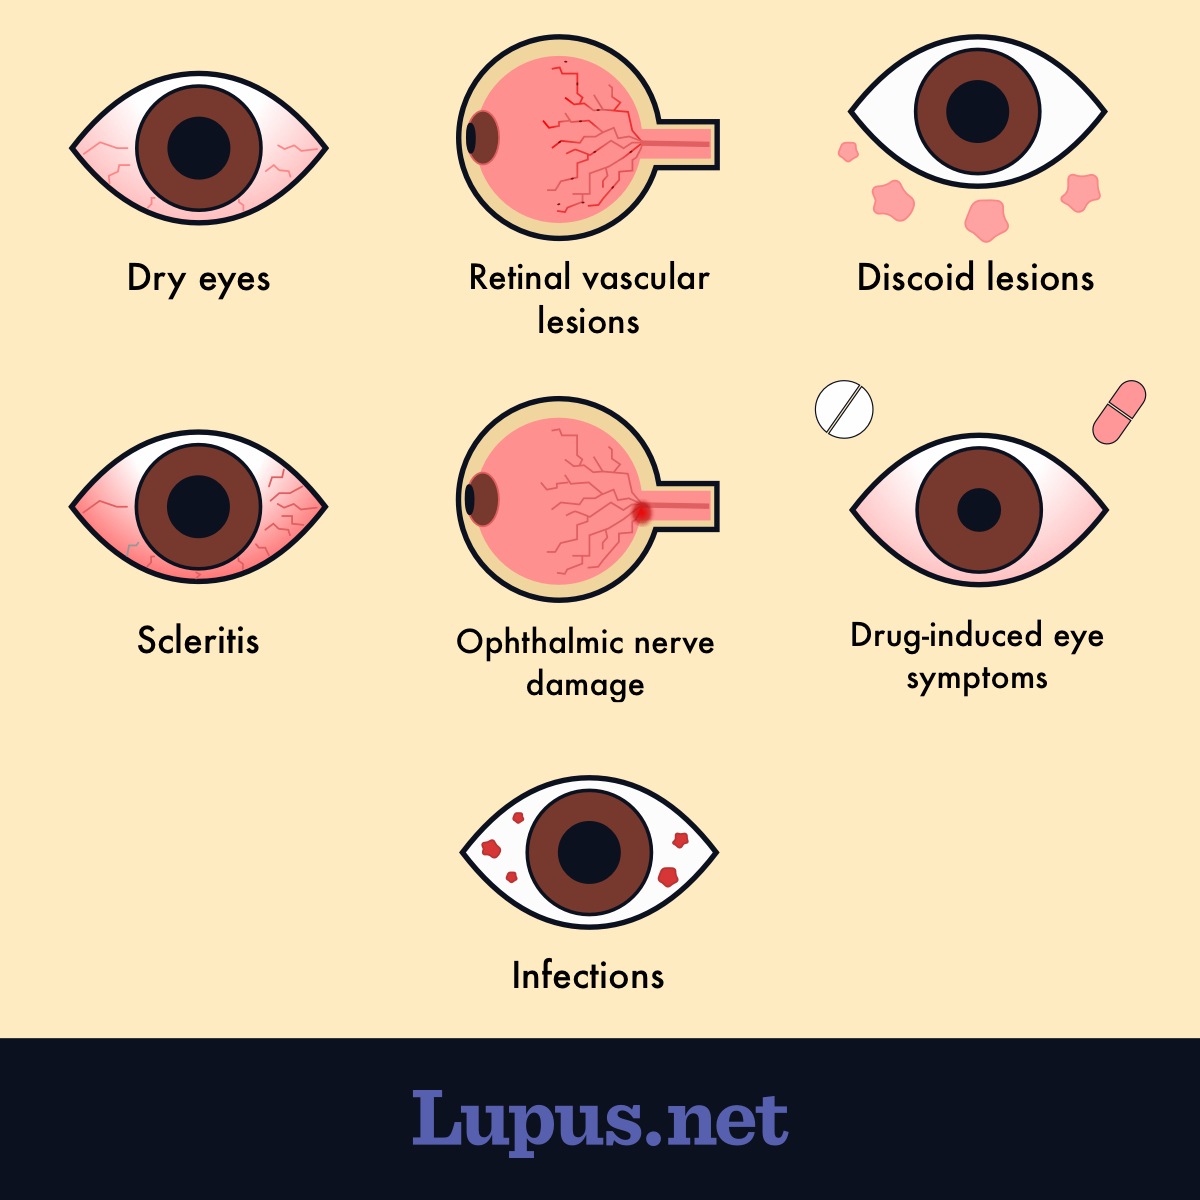 An illustration of the eye complications of lupus, including dry eye, discoid lesions, scleritis, ophthalmic nerve damage, drug-induced eye symptoms, and infections.